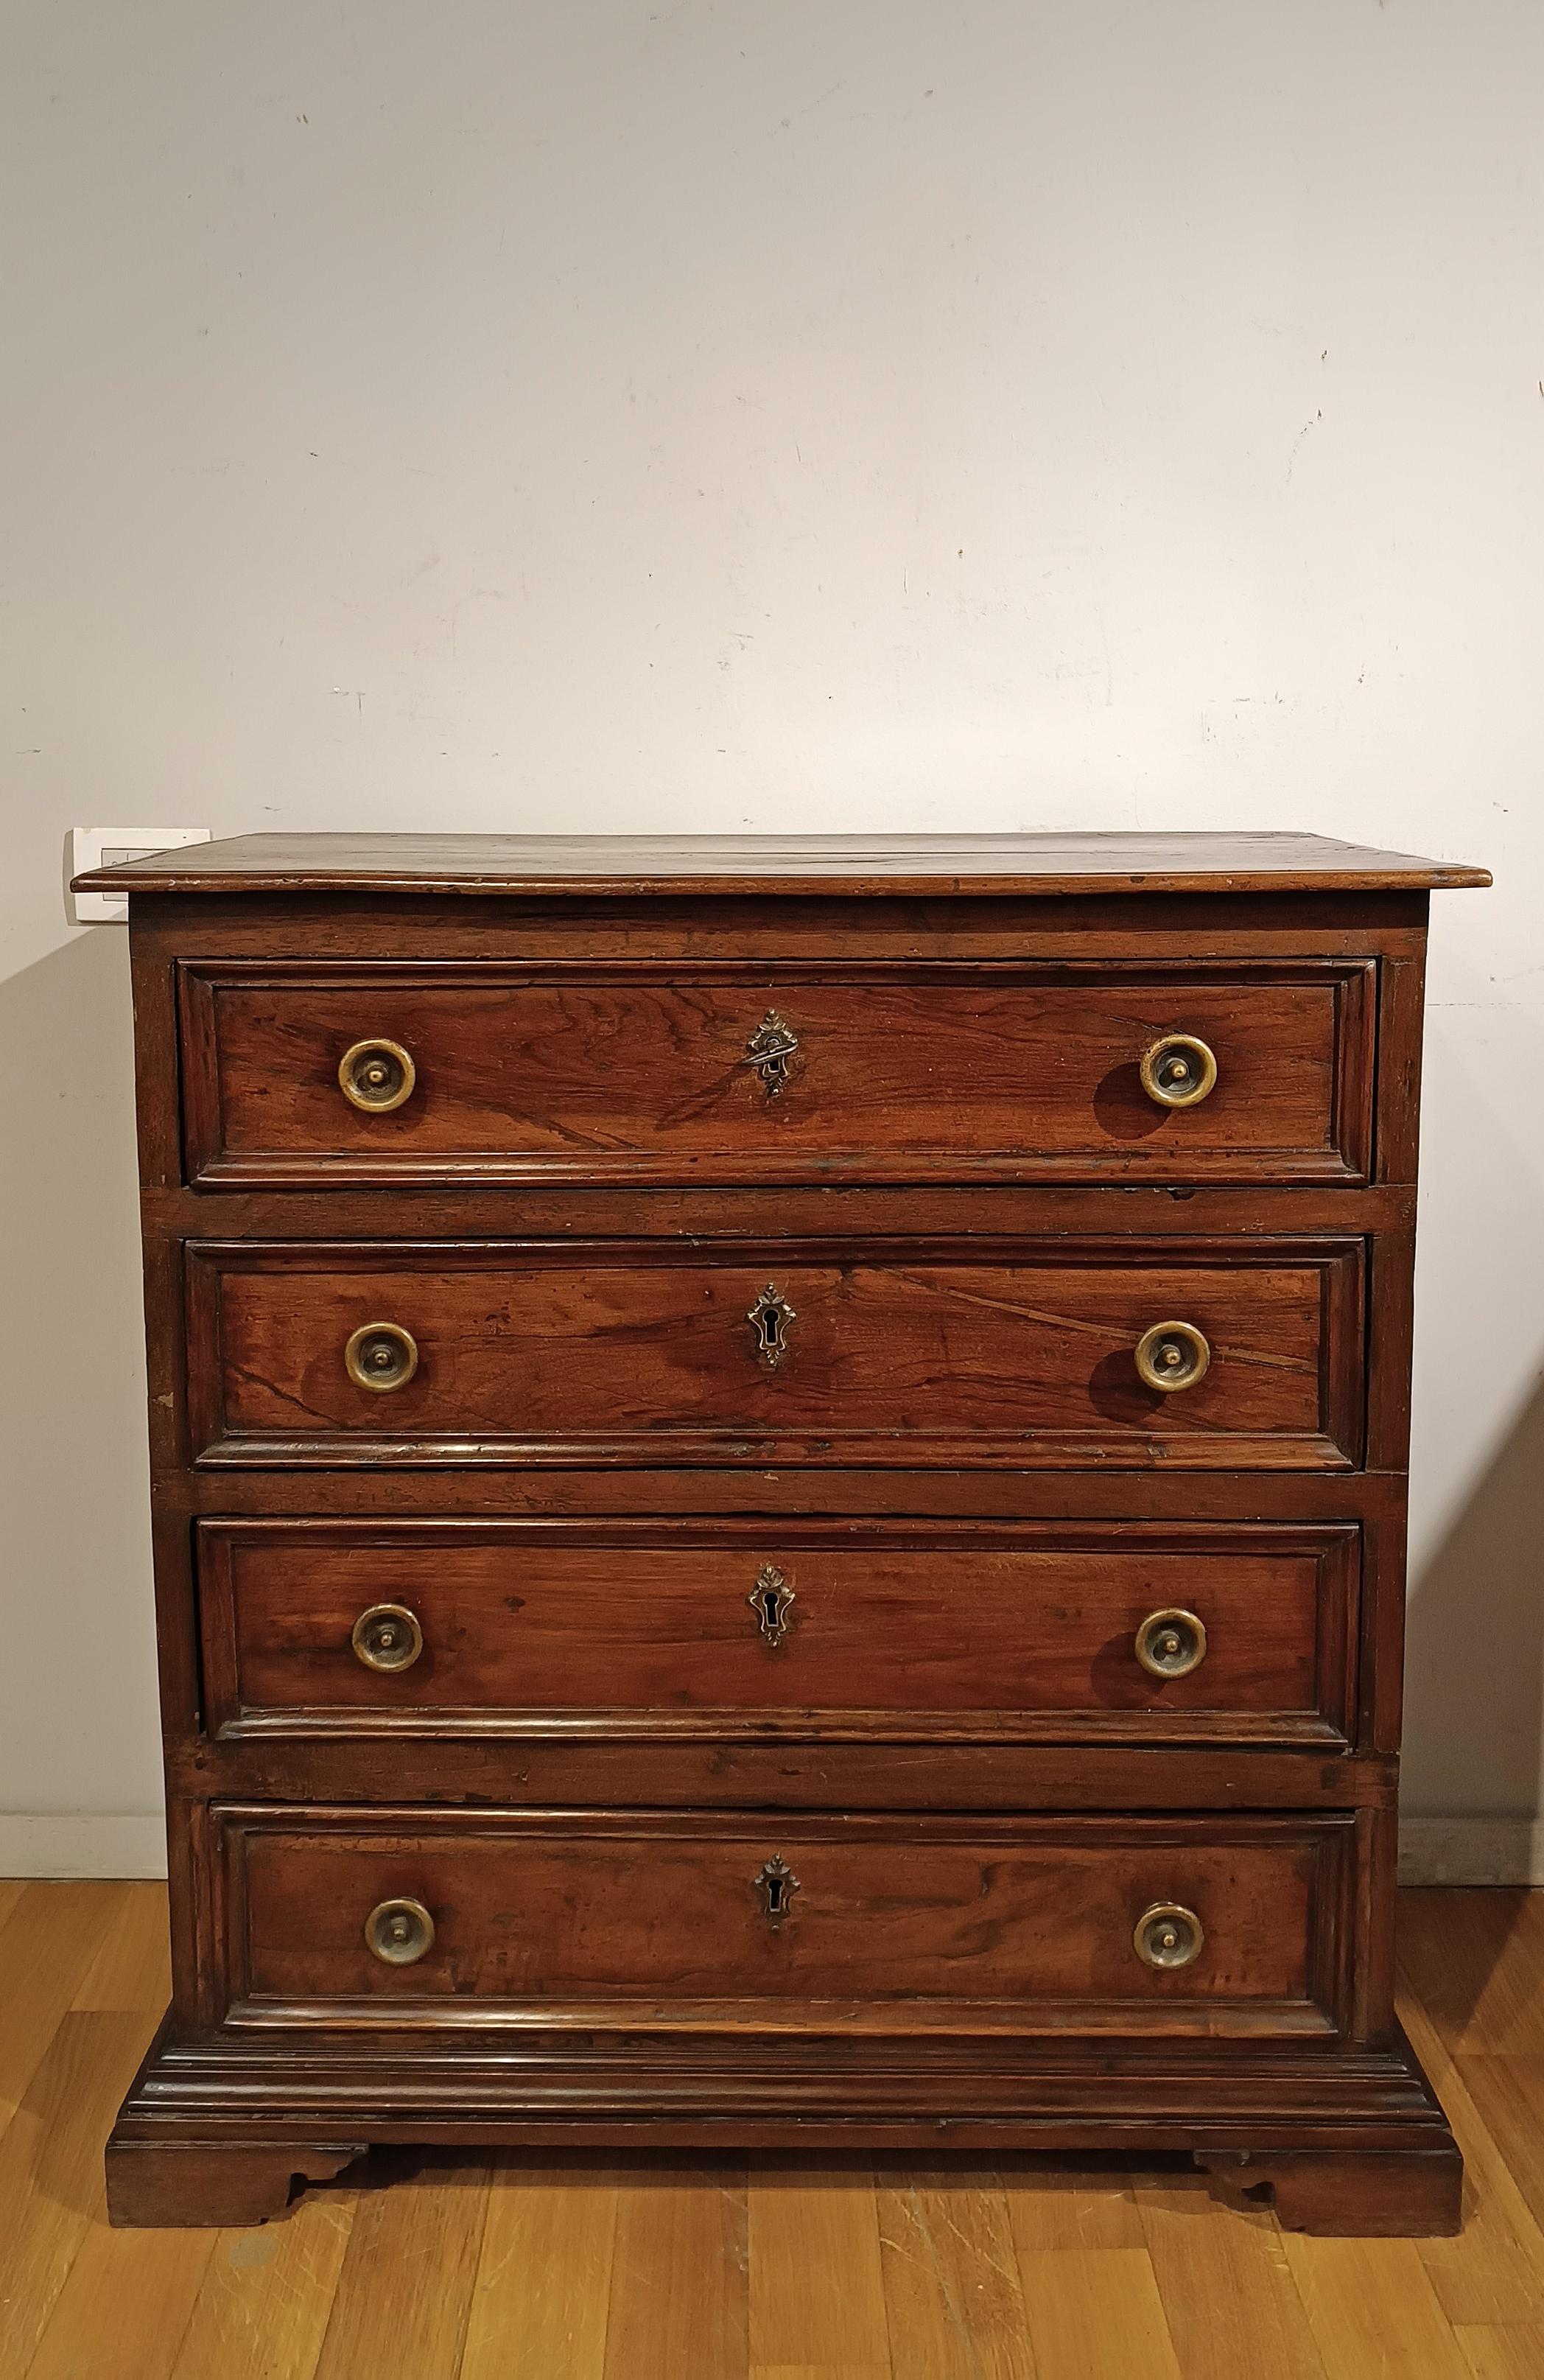 17th CENTURY CHEST OF DRAWERS IN SOLID AND VENEREED WALNUT For Sale 10